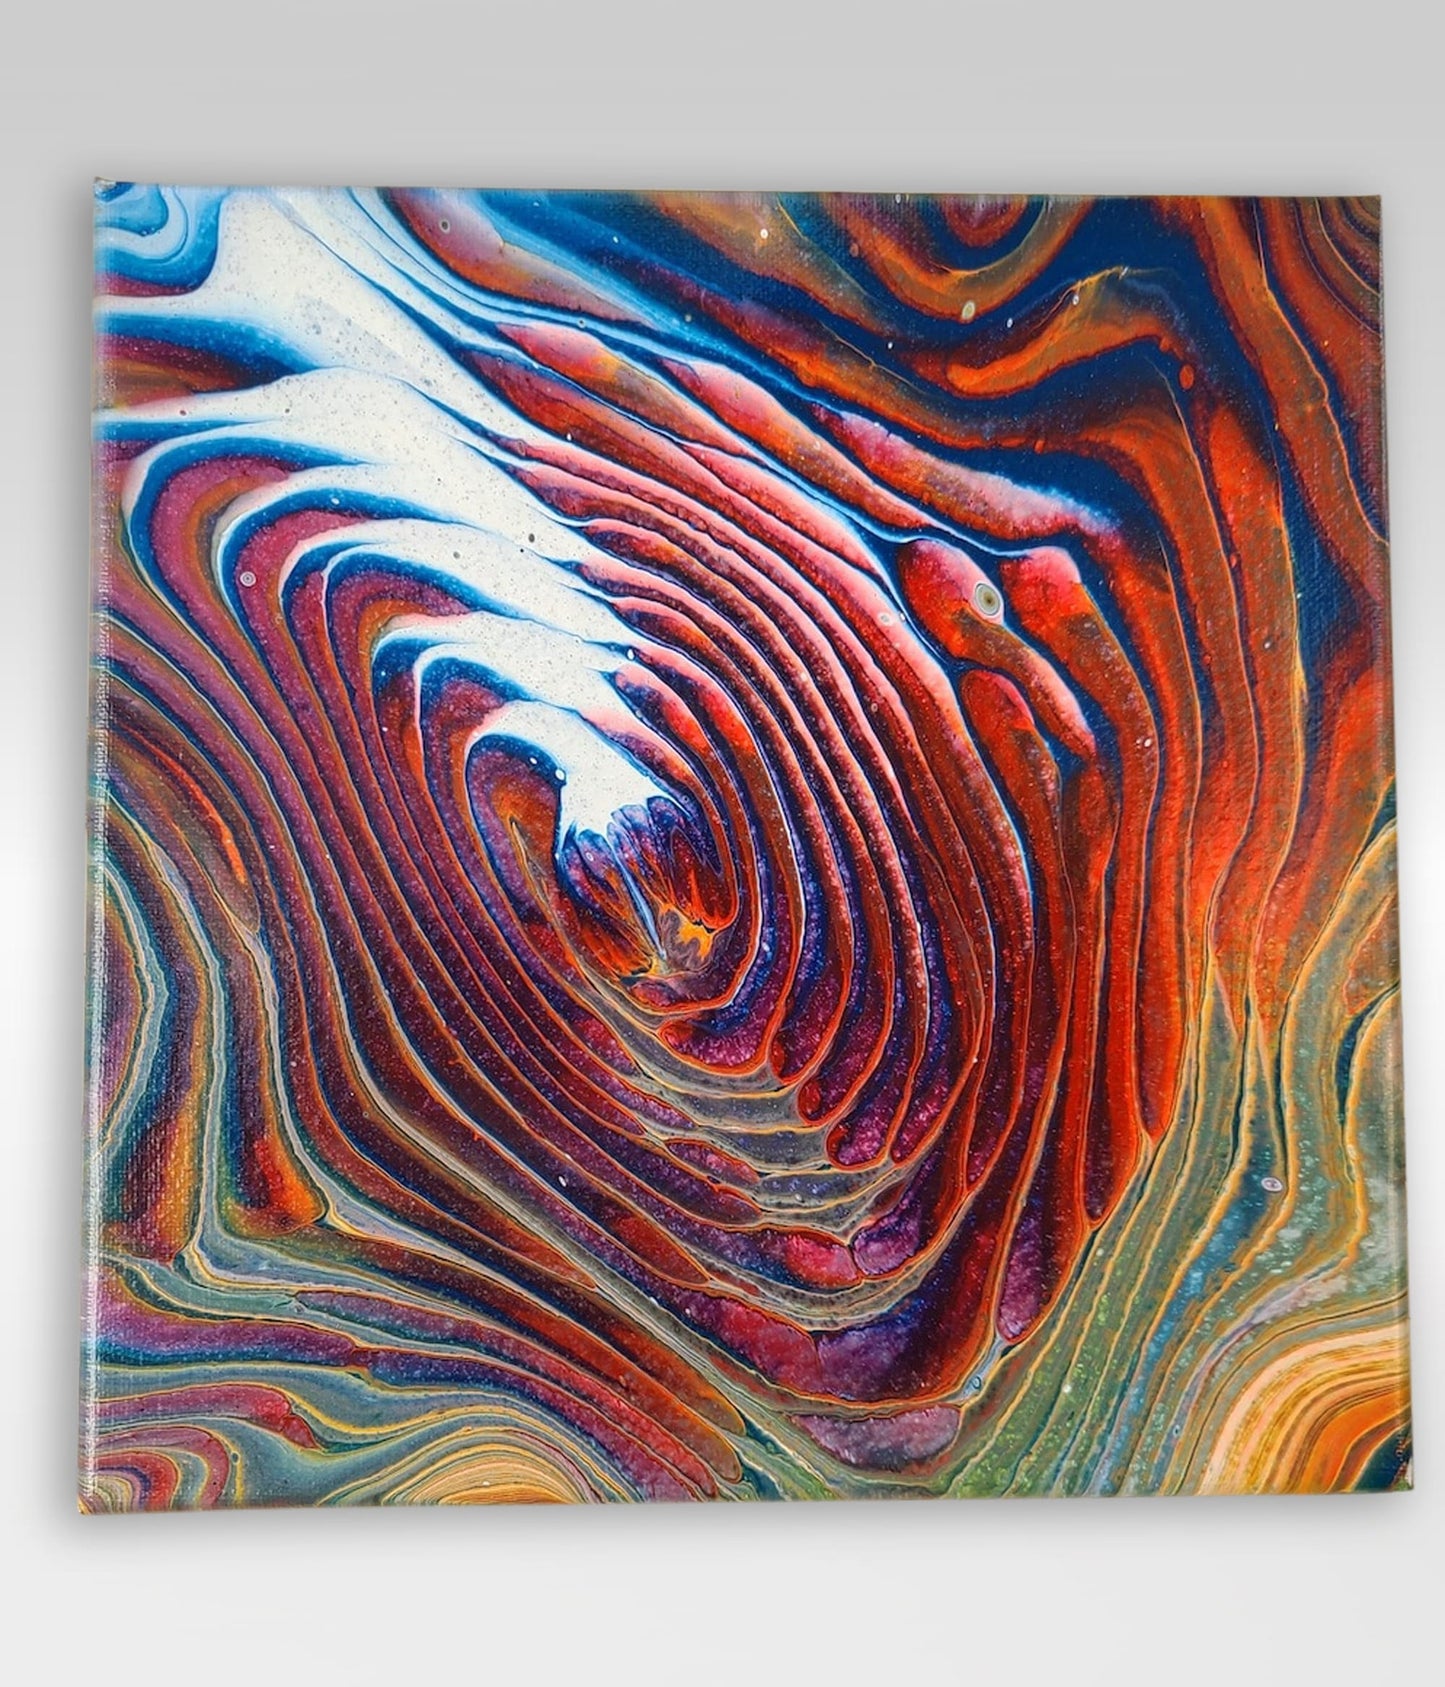 Bug In A Rug – 10 x 10 Acrylic Pour Painting On Canvas